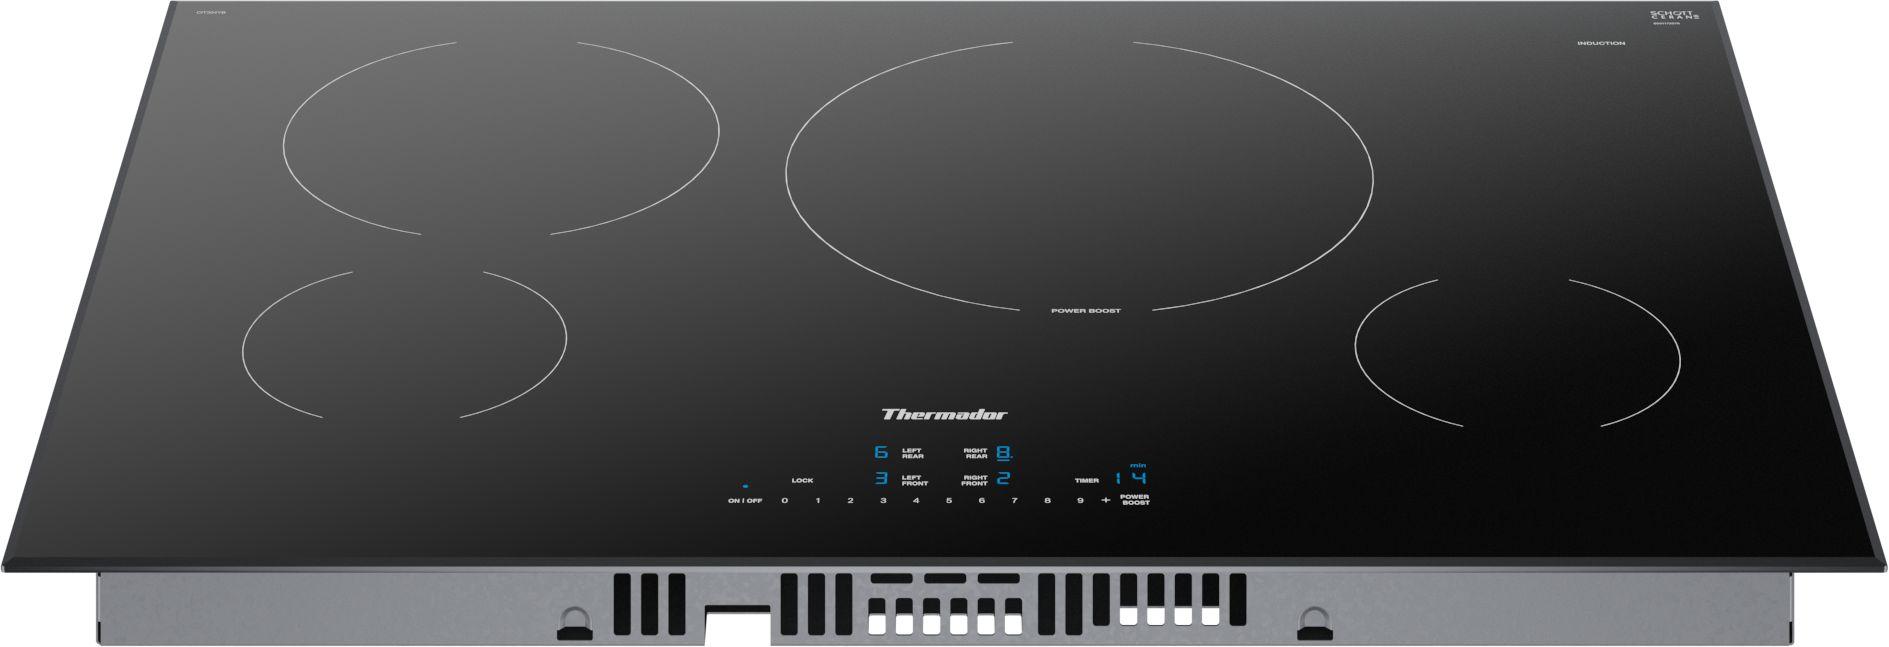 Thermador CIT304YB Induction Cooktop 30'' Black, Surface Mount Without Frame Cit304Yb